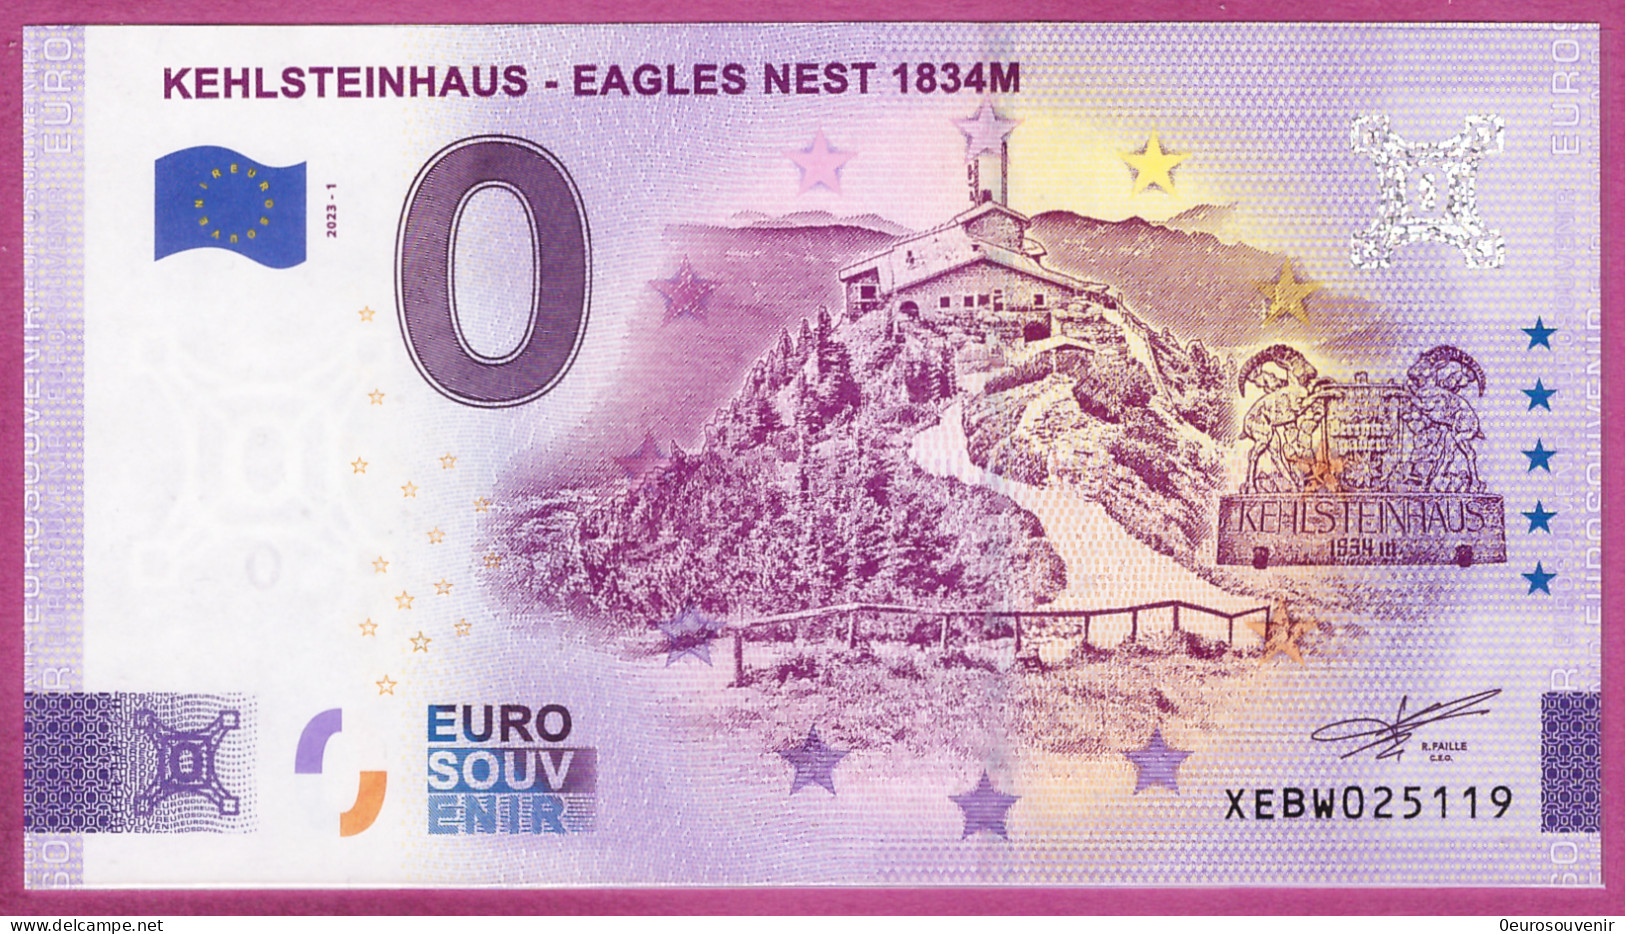 0-Euro XEBW 2023-1 KEHLSTEINHAUS - EAGLES NEST 1834 - Private Proofs / Unofficial